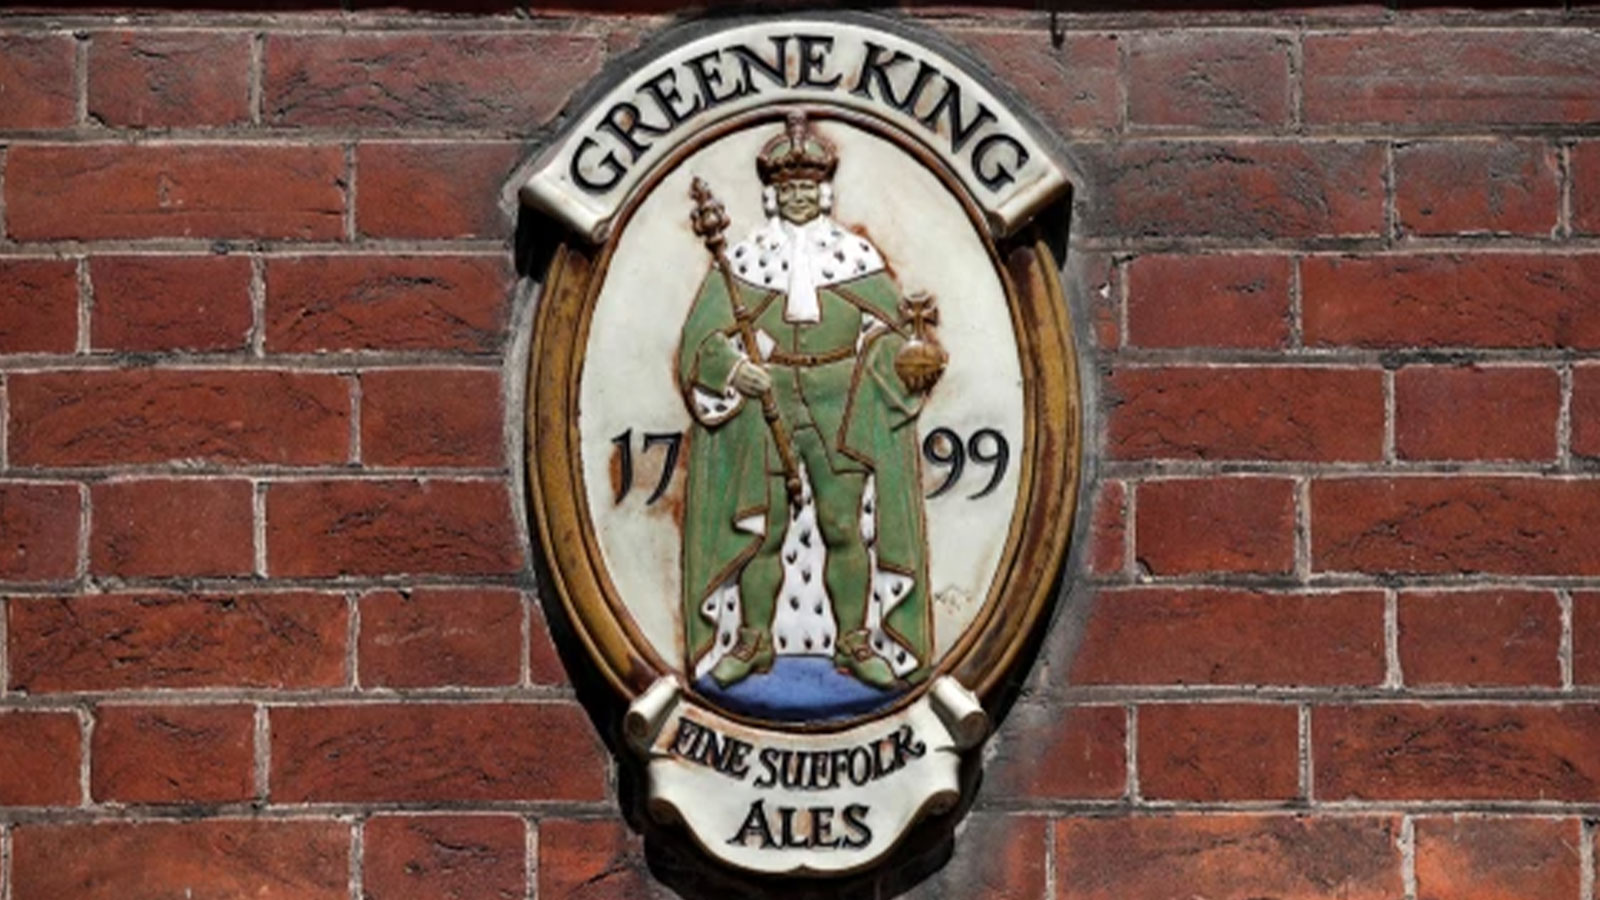 A Greene King plaque outside its brewery and headquarters in Bury St Edmunds, Suffolk, Britain.